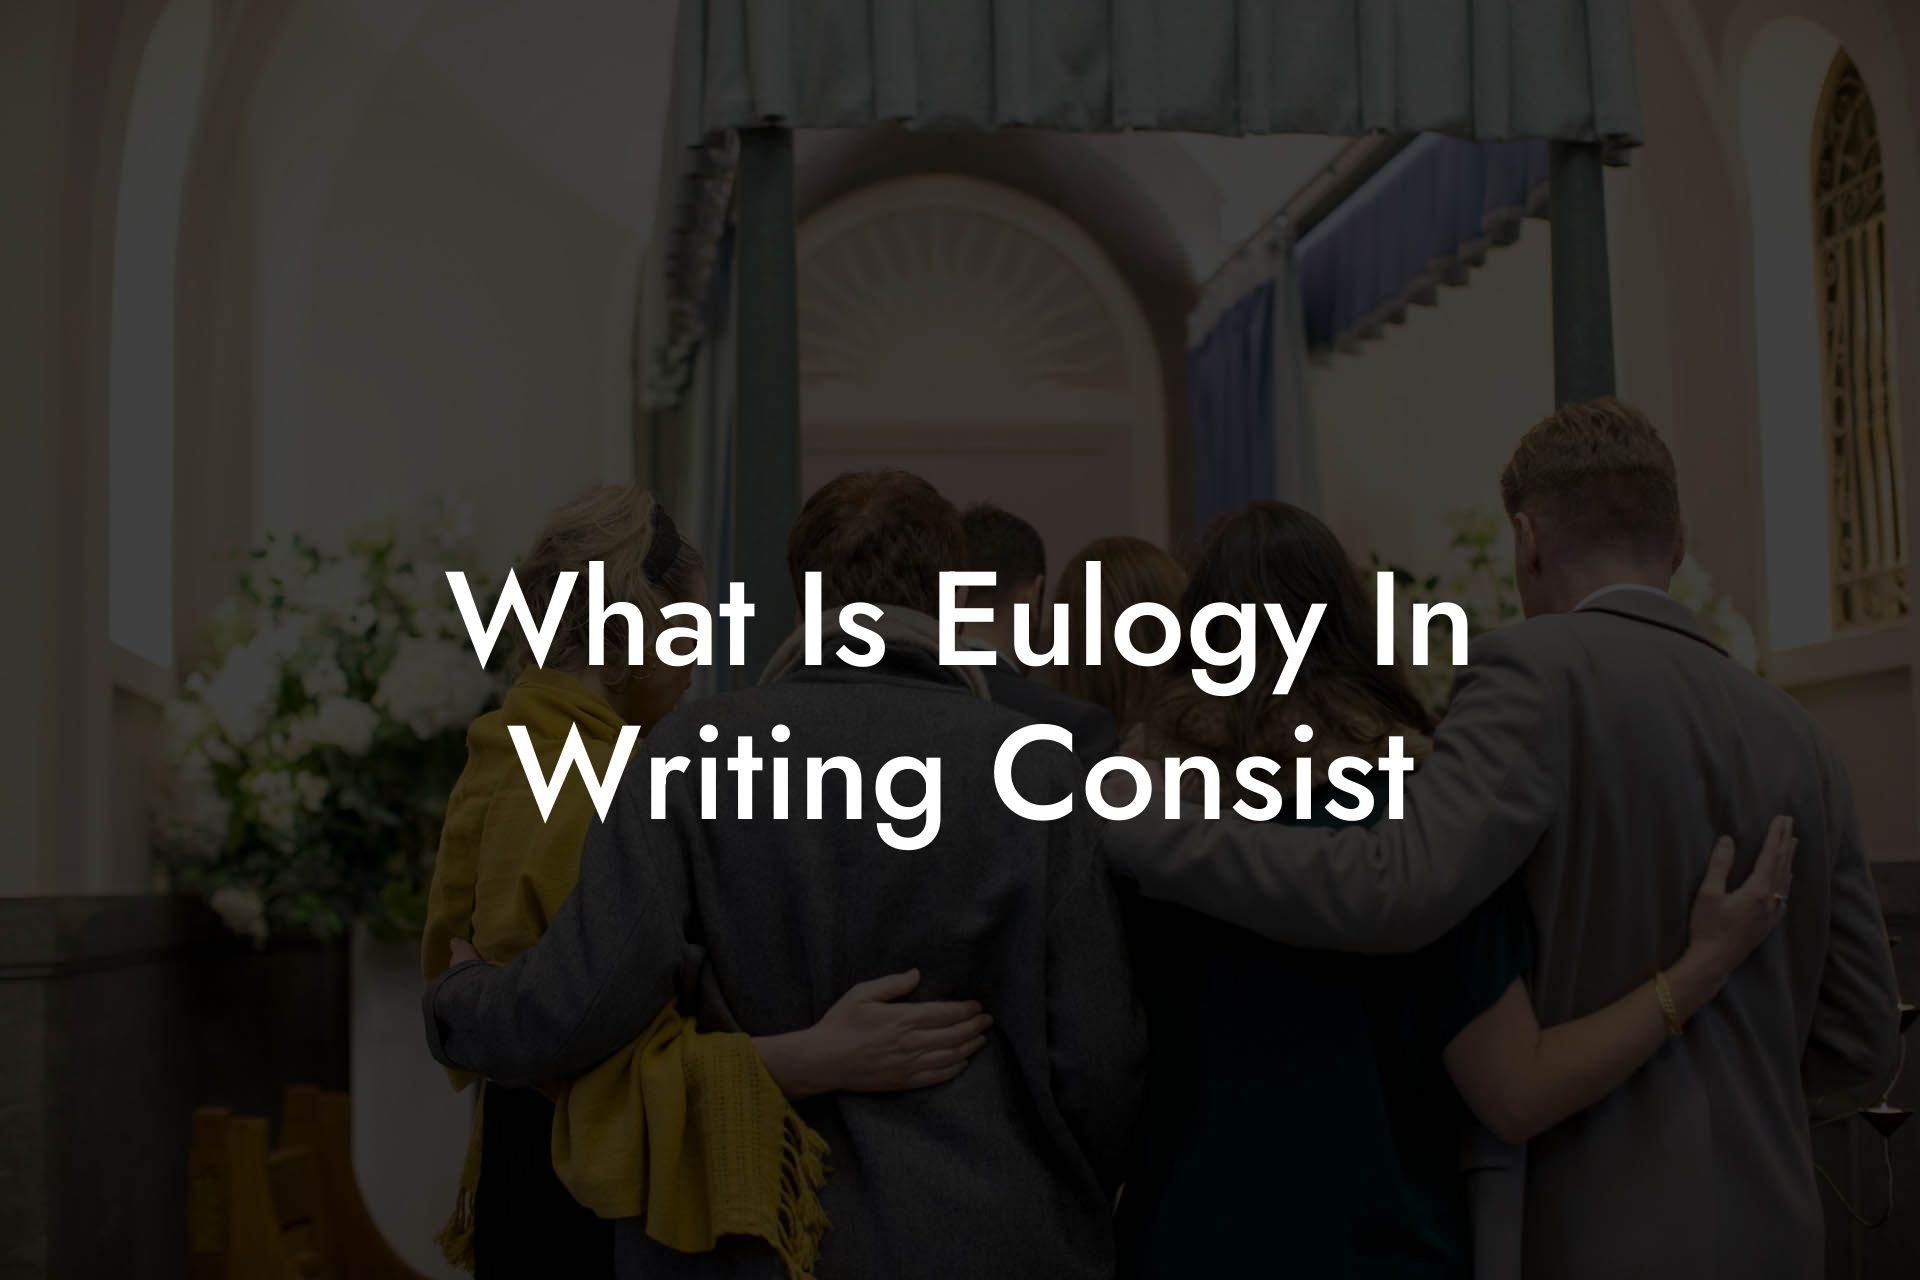 What Is Eulogy In Writing Consist